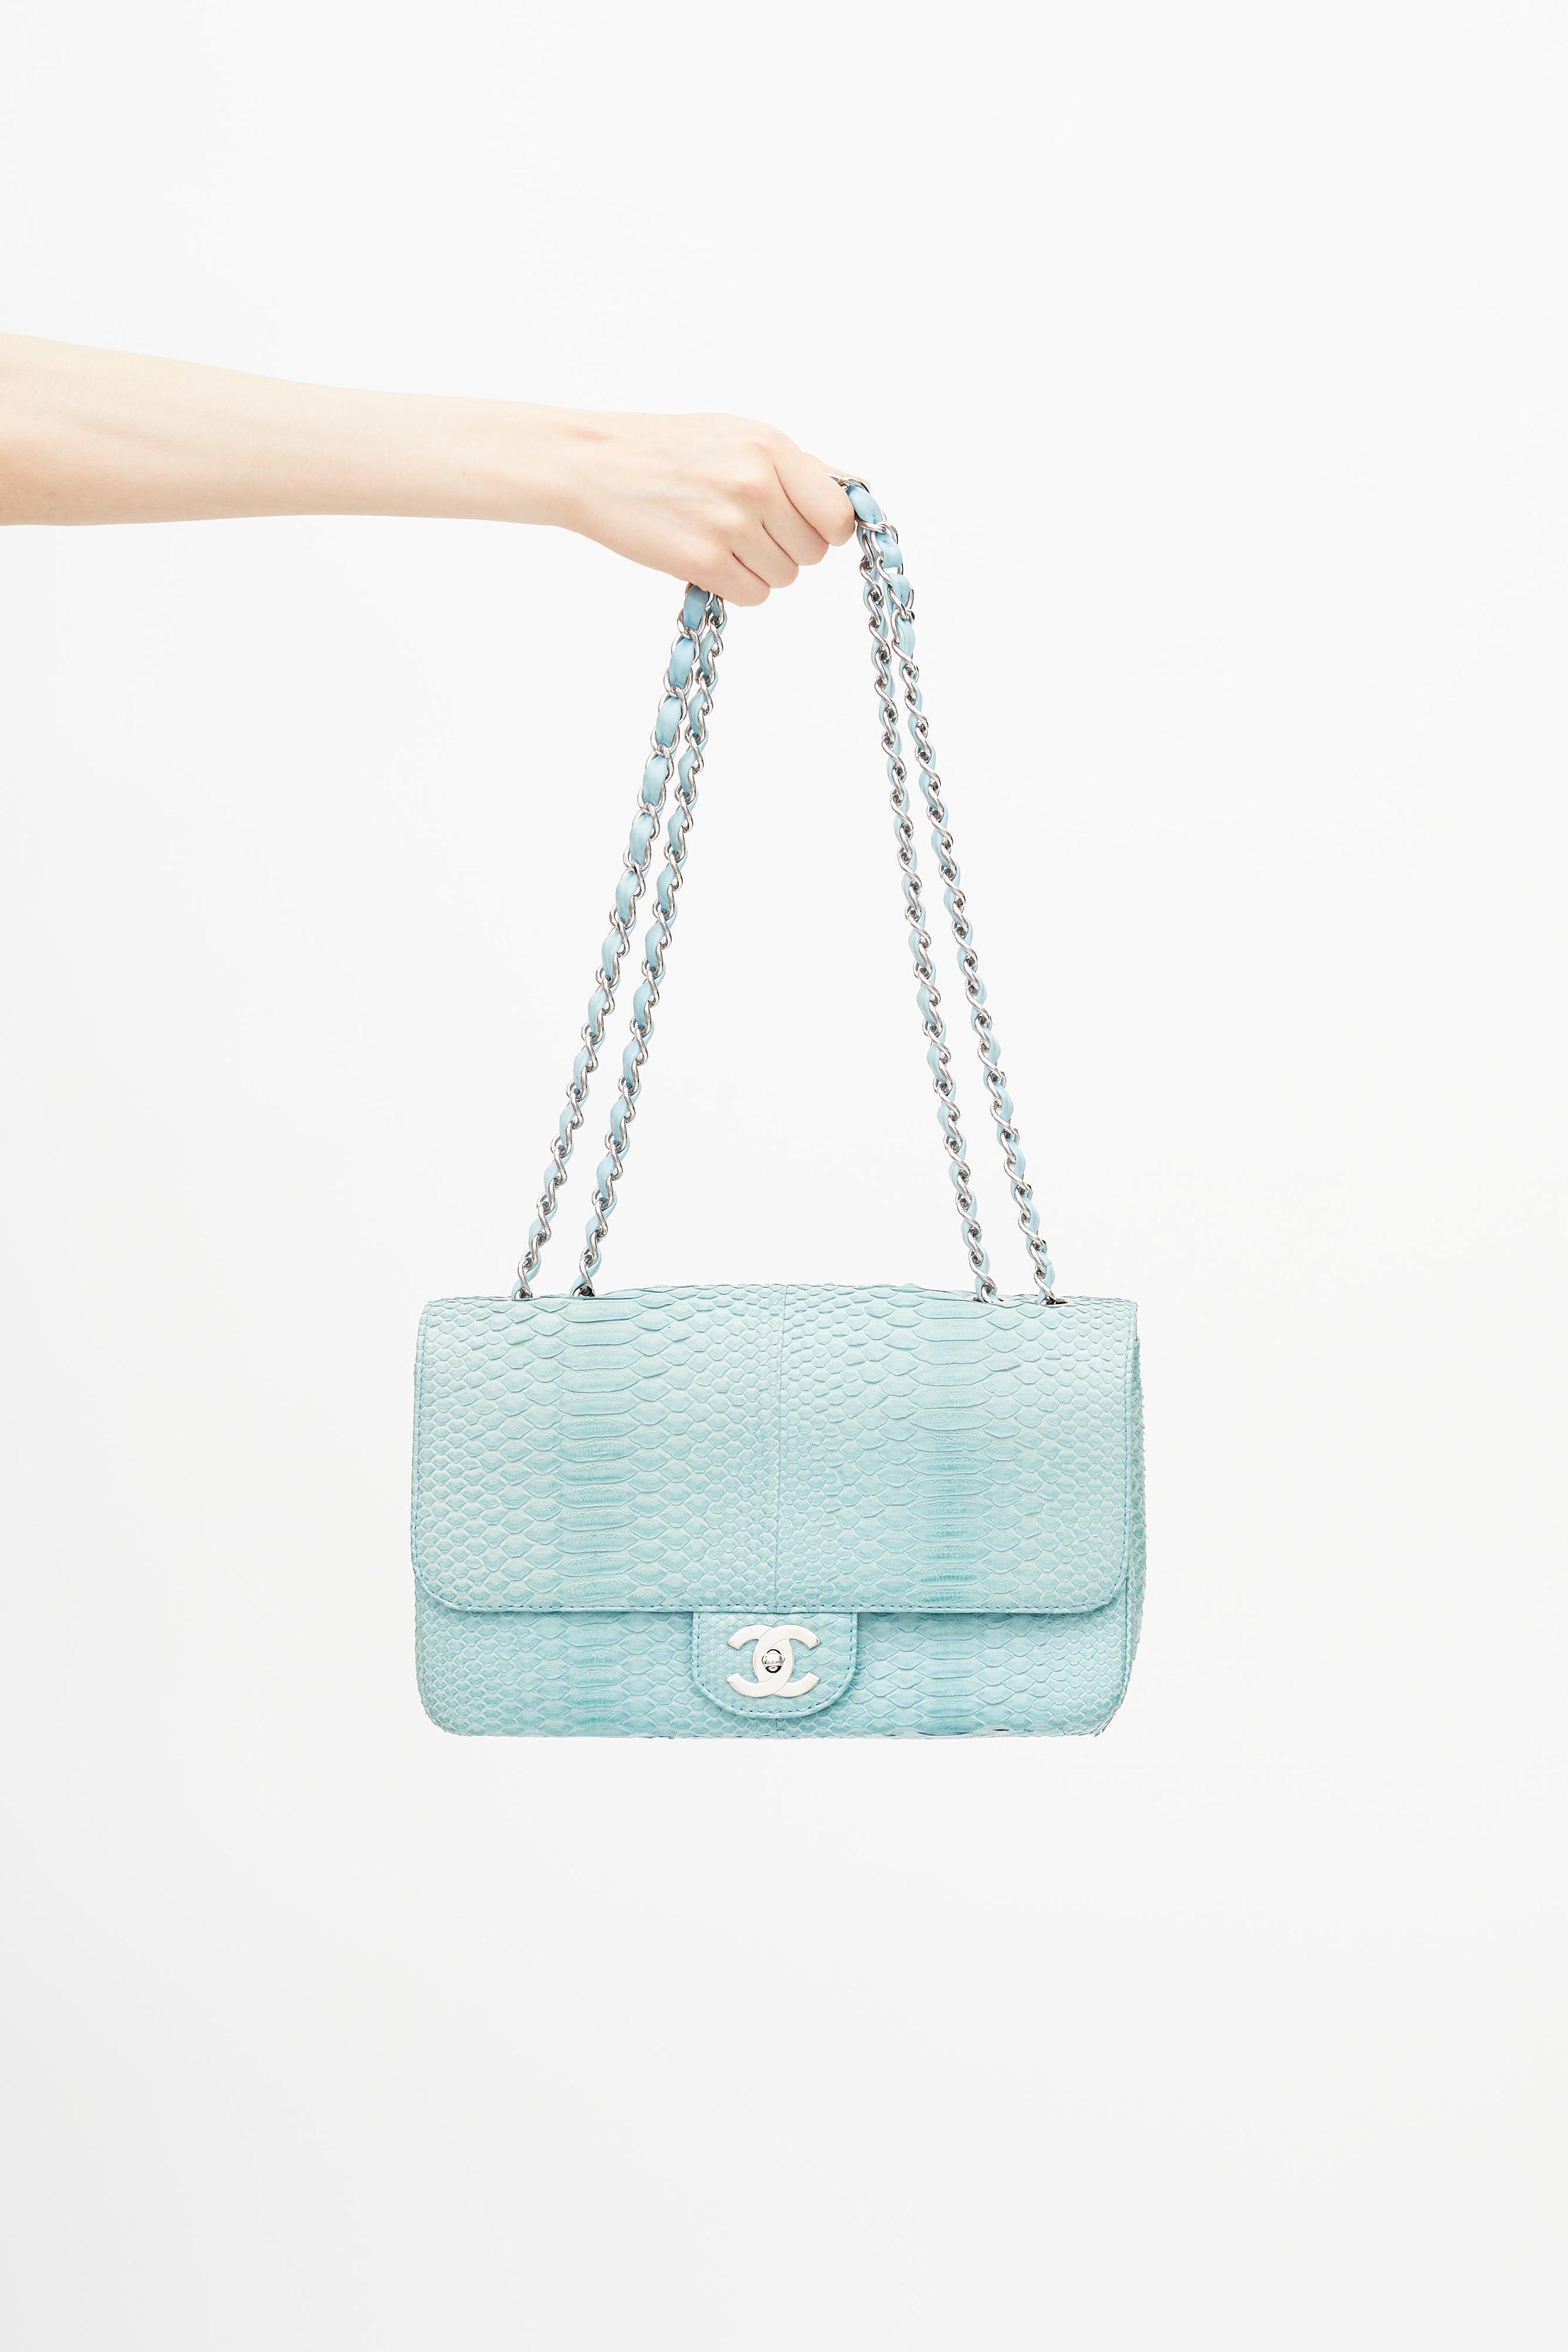 Chanel // Late 2000s Turquoise Textured Leather Jumbo Timeless